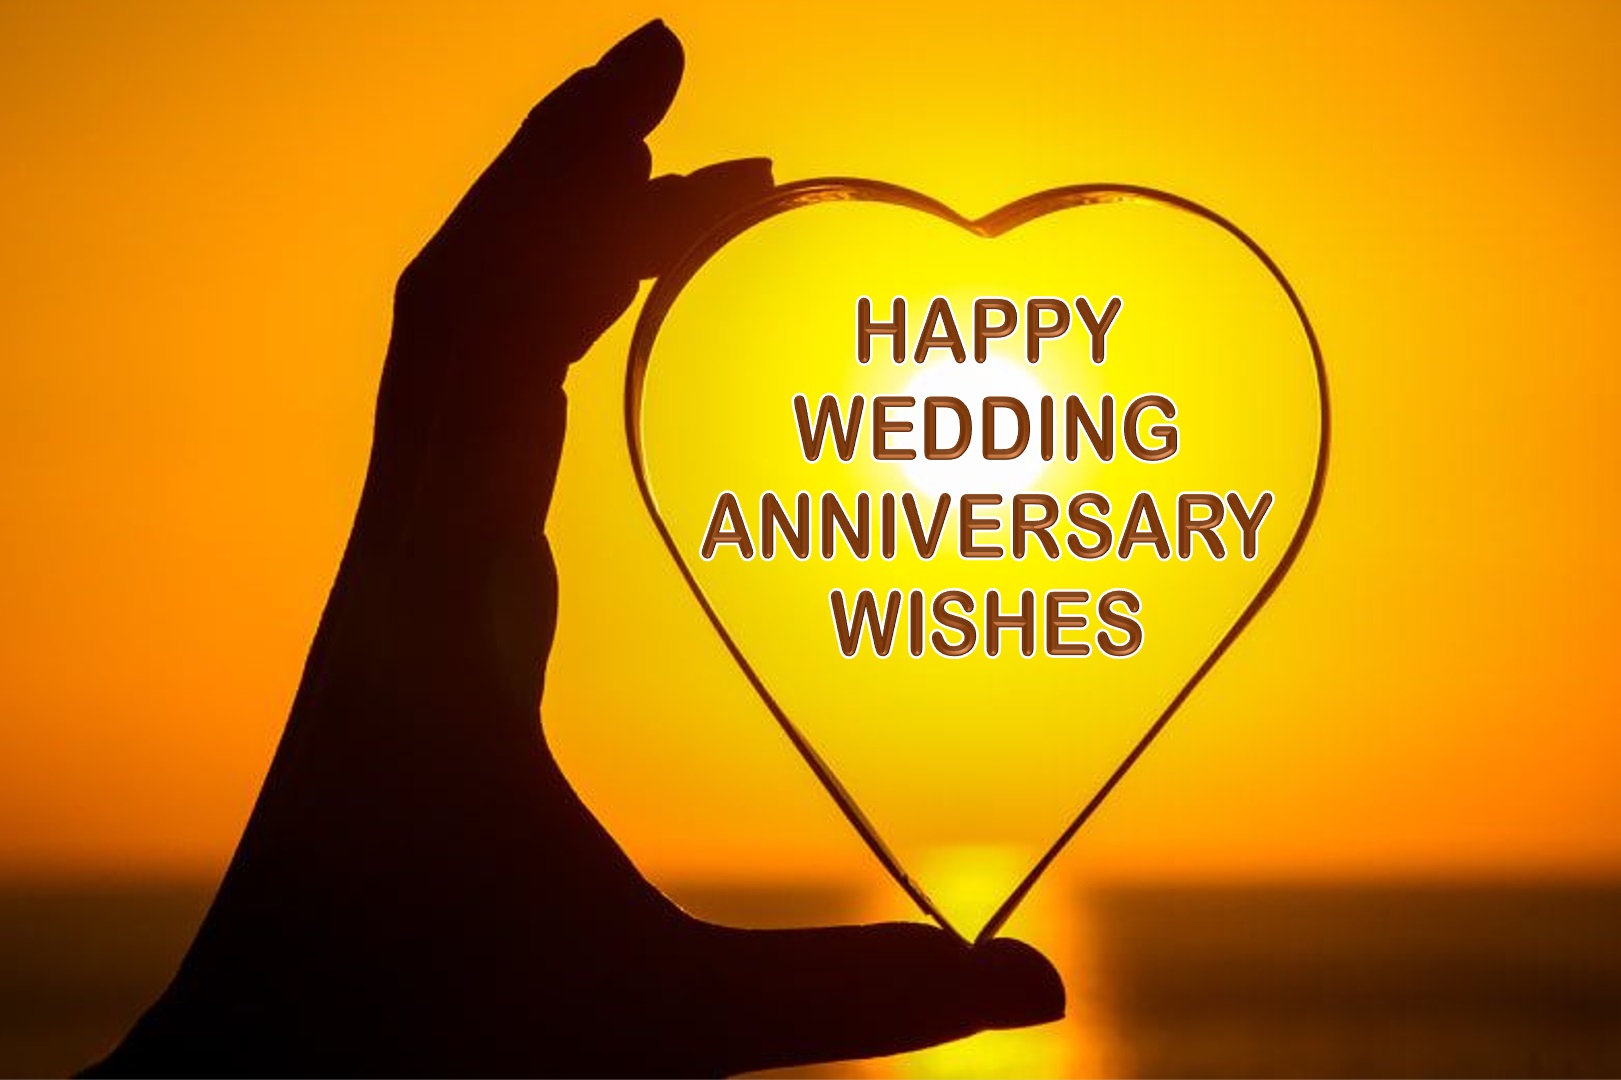 Happy Wedding Anniversary Wishes And Messages | SuperbWishes